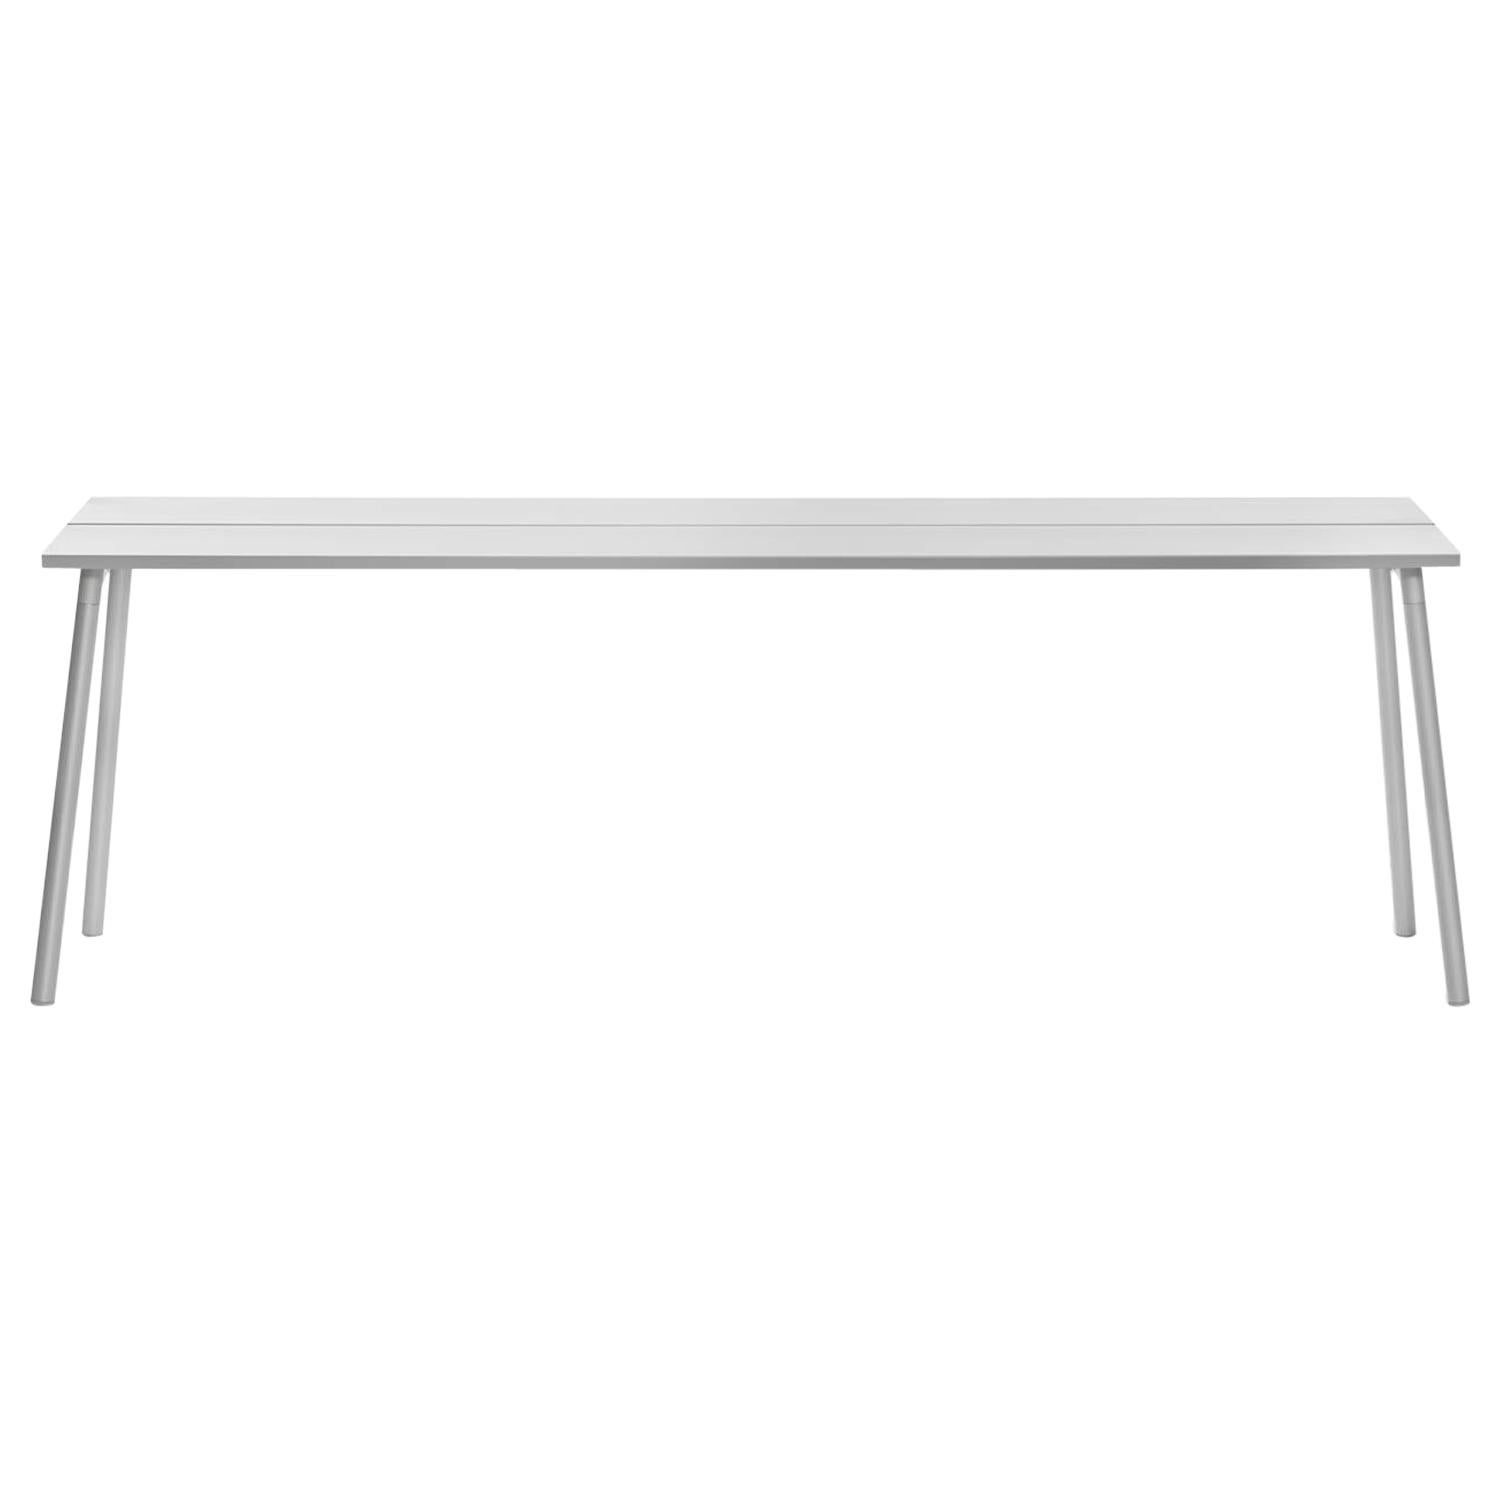 Emeco Run Large Side Table in Clear Anodized Aluminum by Sam Hecht + Kim Colin For Sale